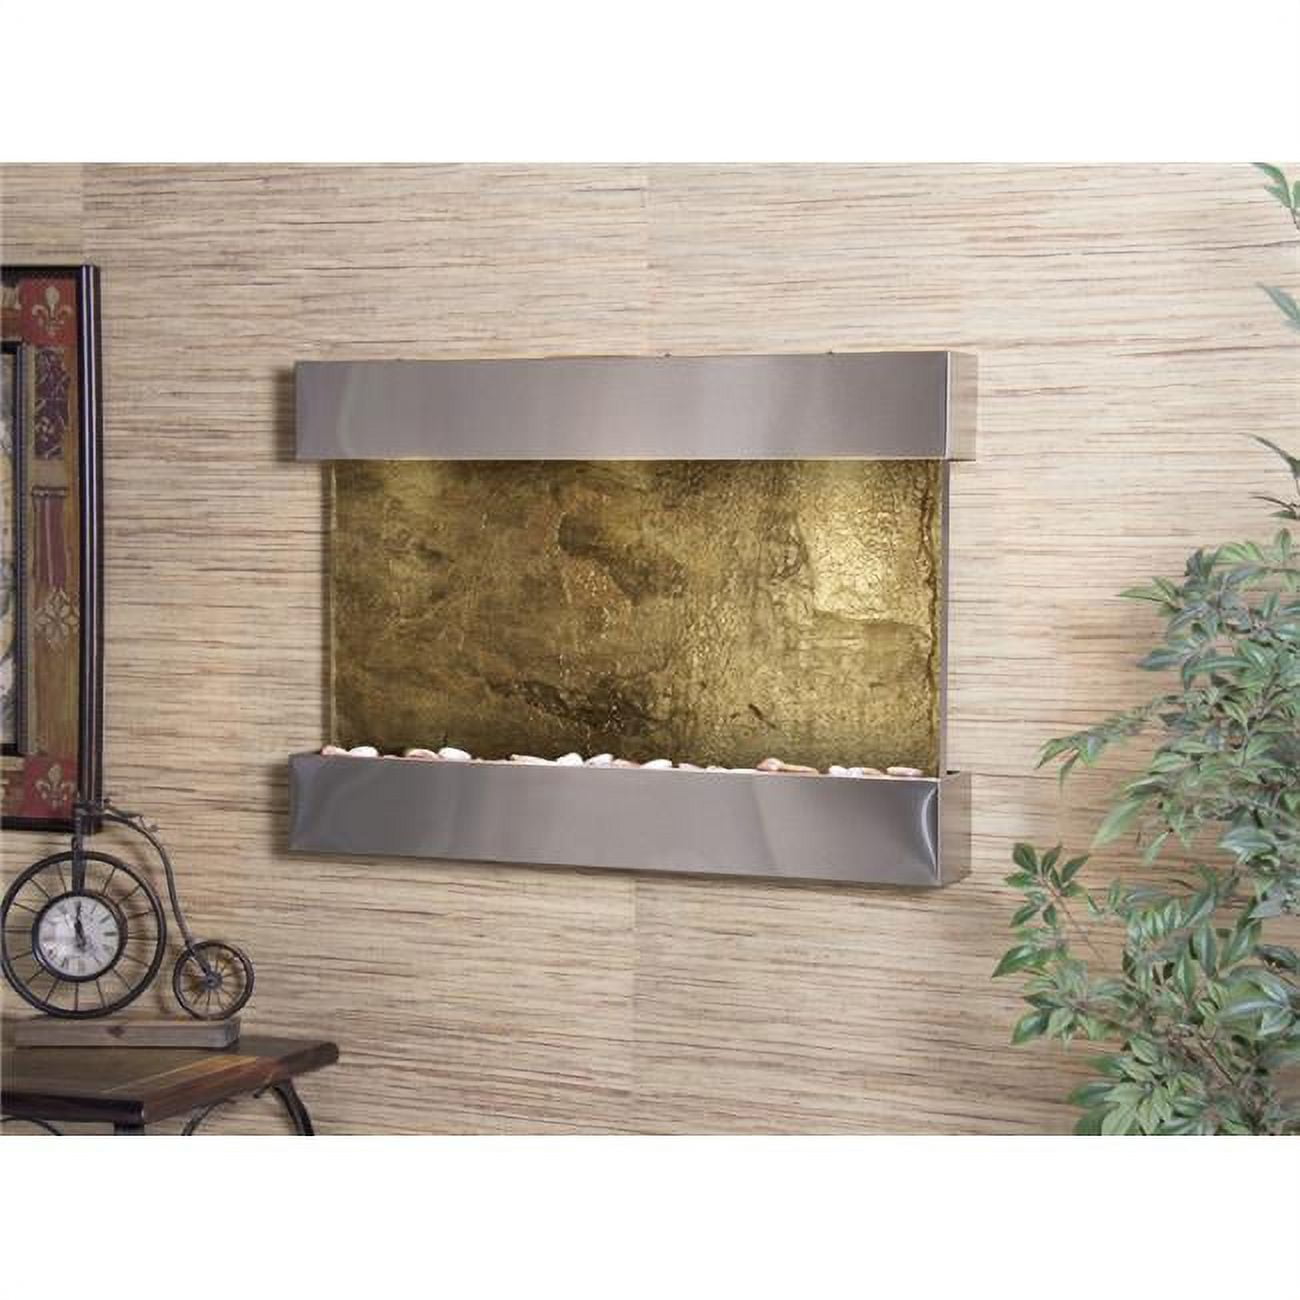 Adagio RCS2002 Reflection Creek Stainless Steel Green Natural Slate Wall Fountain